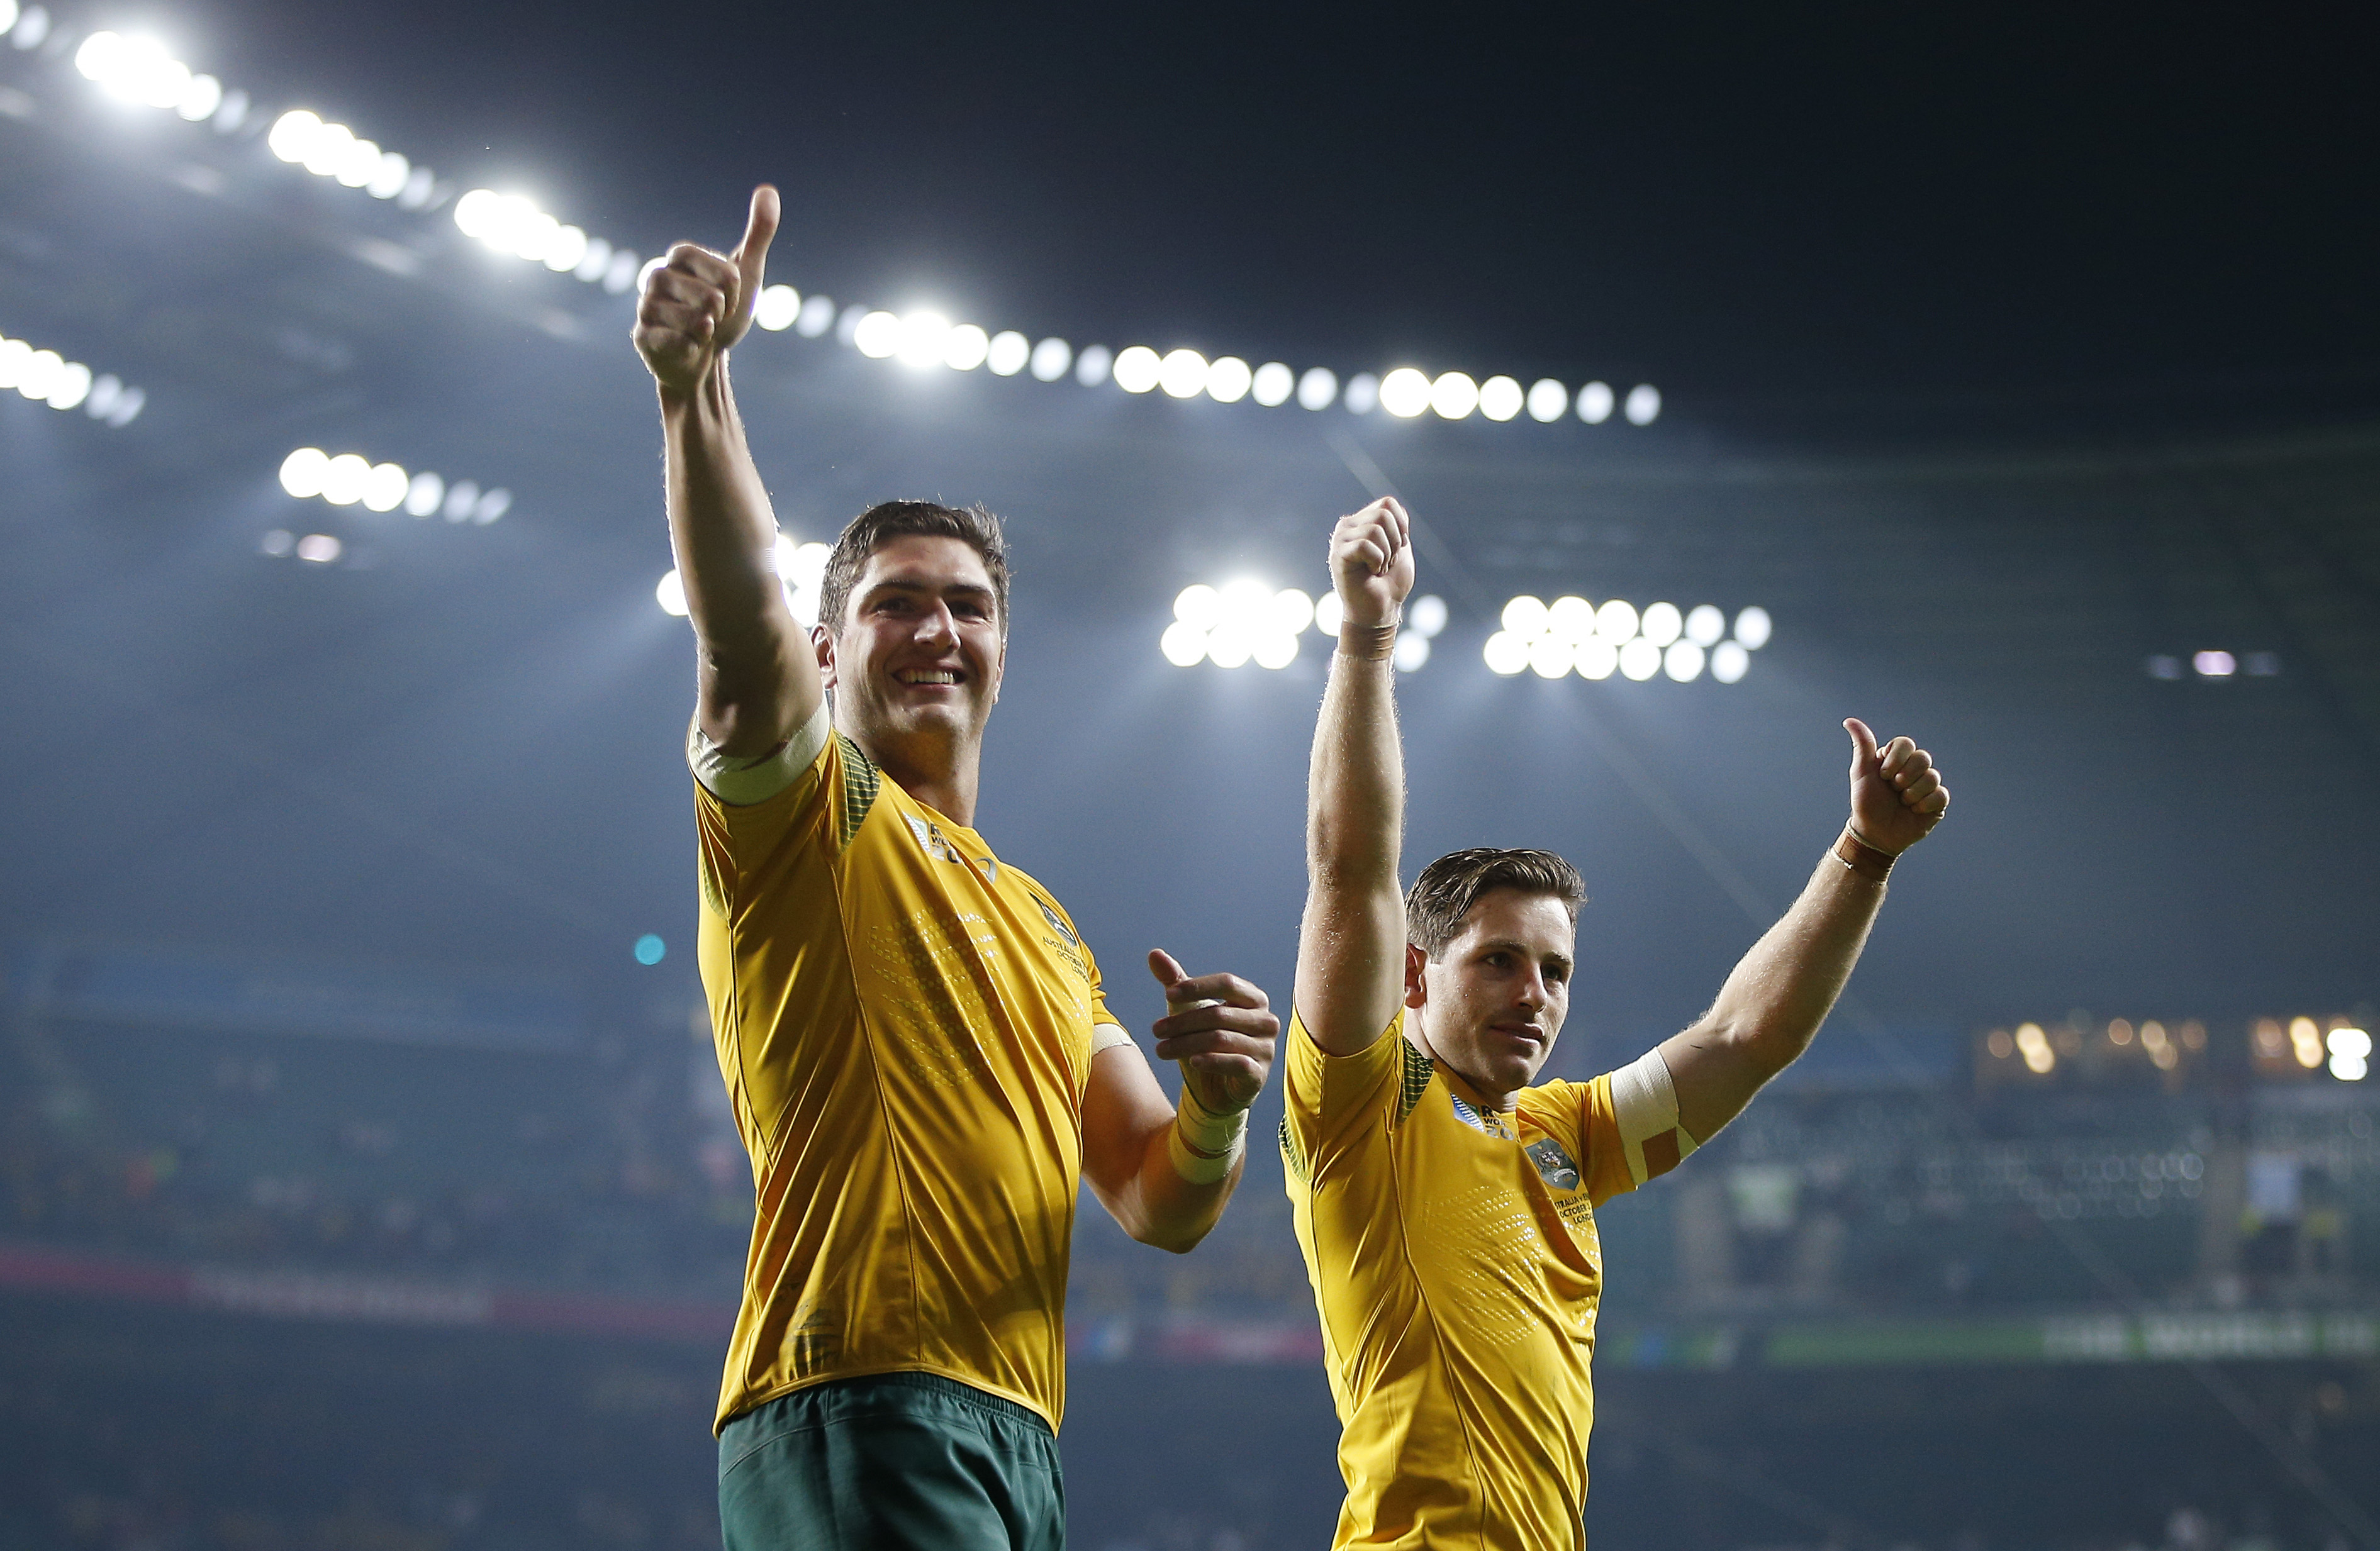 Rugby Union - England v Australia - IRB Rugby World Cup 2015 Pool A - Twickenham Stadium, London, England - 3/10/15 Australia's Bernard Foley (R) and Rob Simmons celebrate victory at the end of the match Action Images via Reuters / Andrew Couldridge Livepic